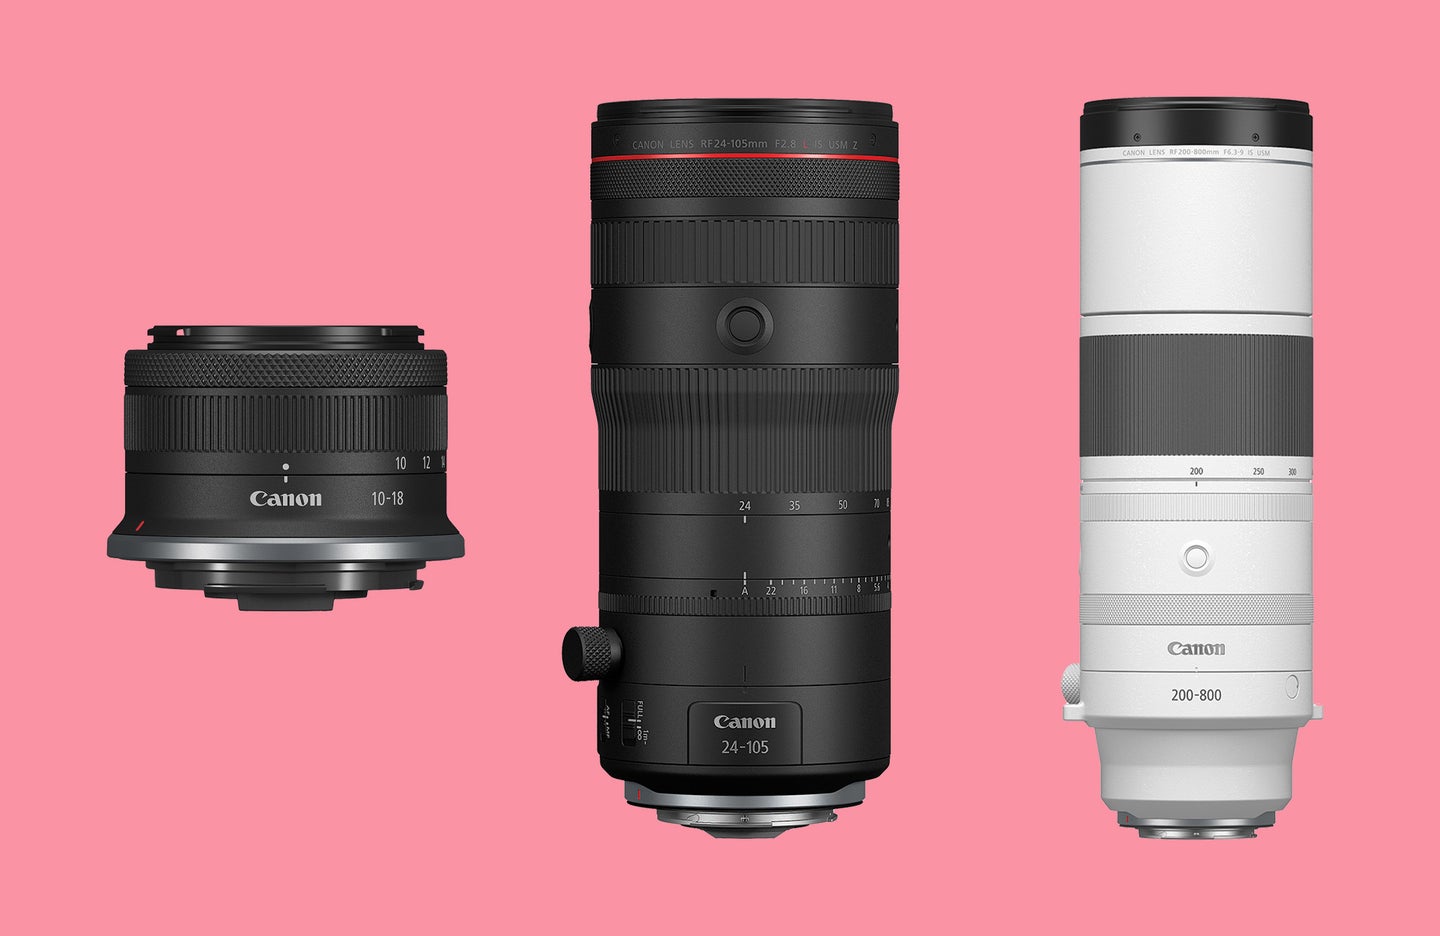 Three new Canon lenses are placed against a light red background.